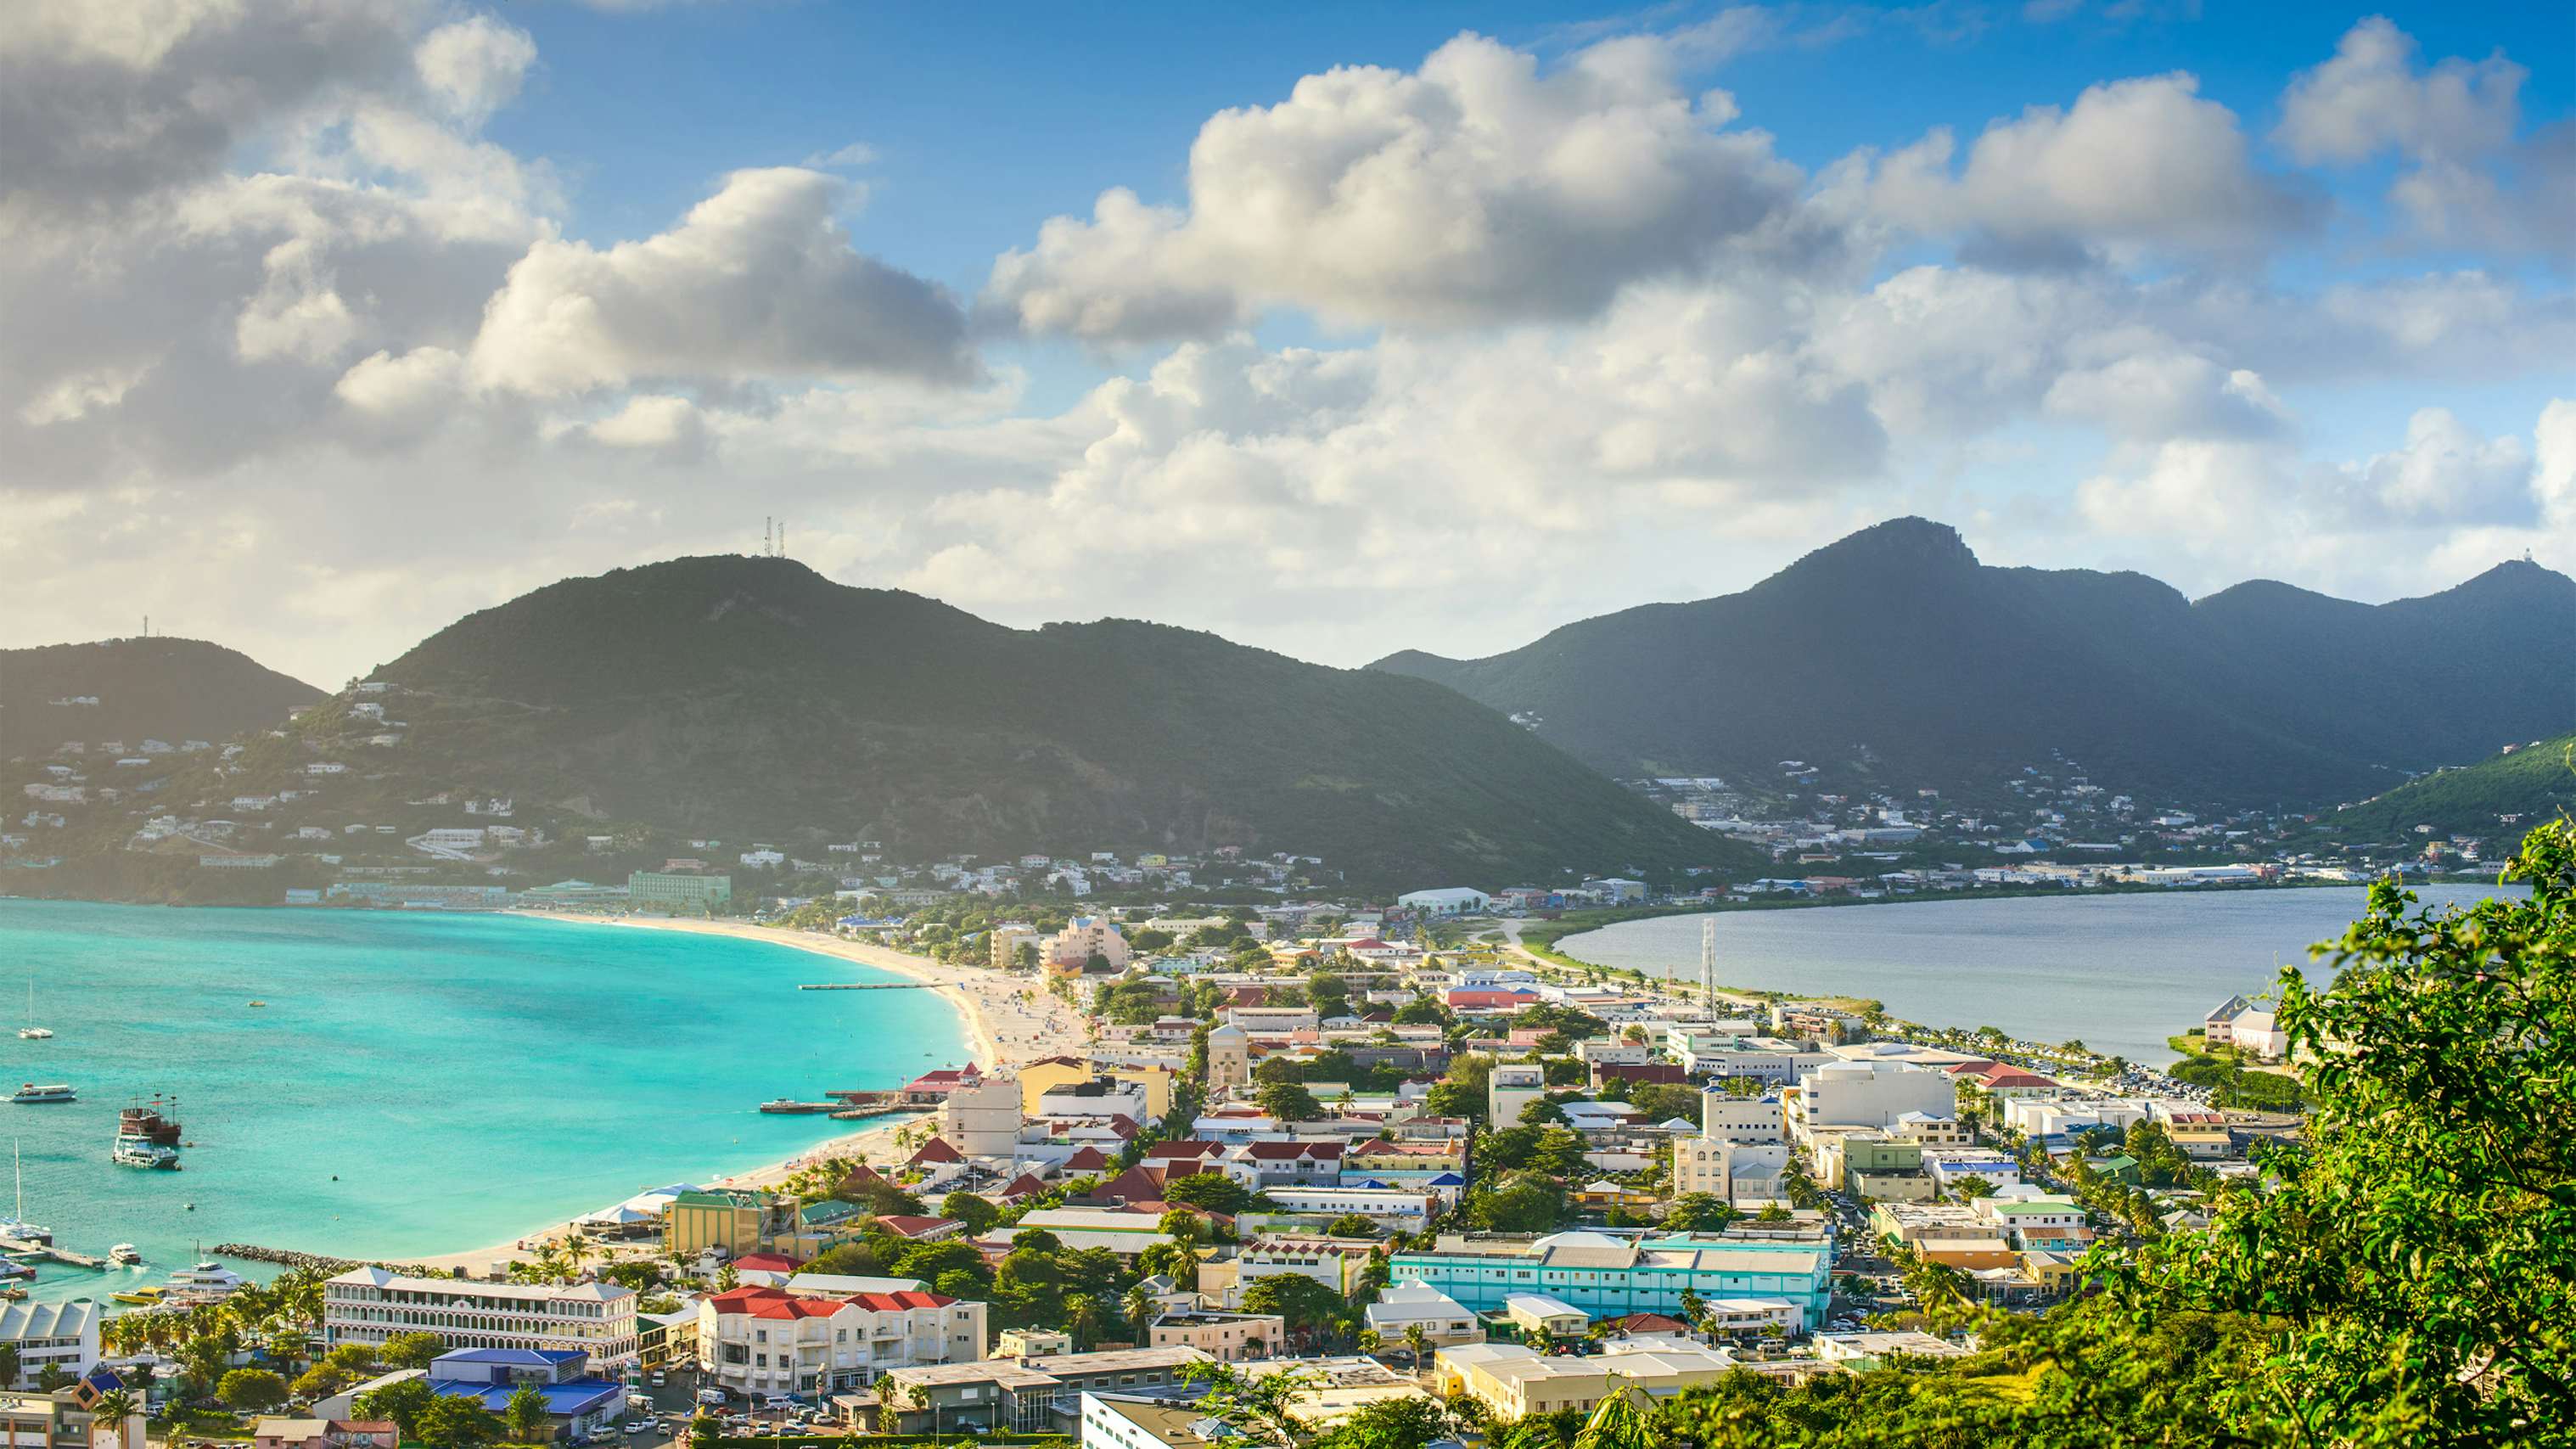 Experience the epitome of luxury with a St. Maarten Crewed Yacht Charter, showcasing an enchanting aerial view of St. Martin's coastline, where blue waters meet sandy shores in Caribbean splendor.